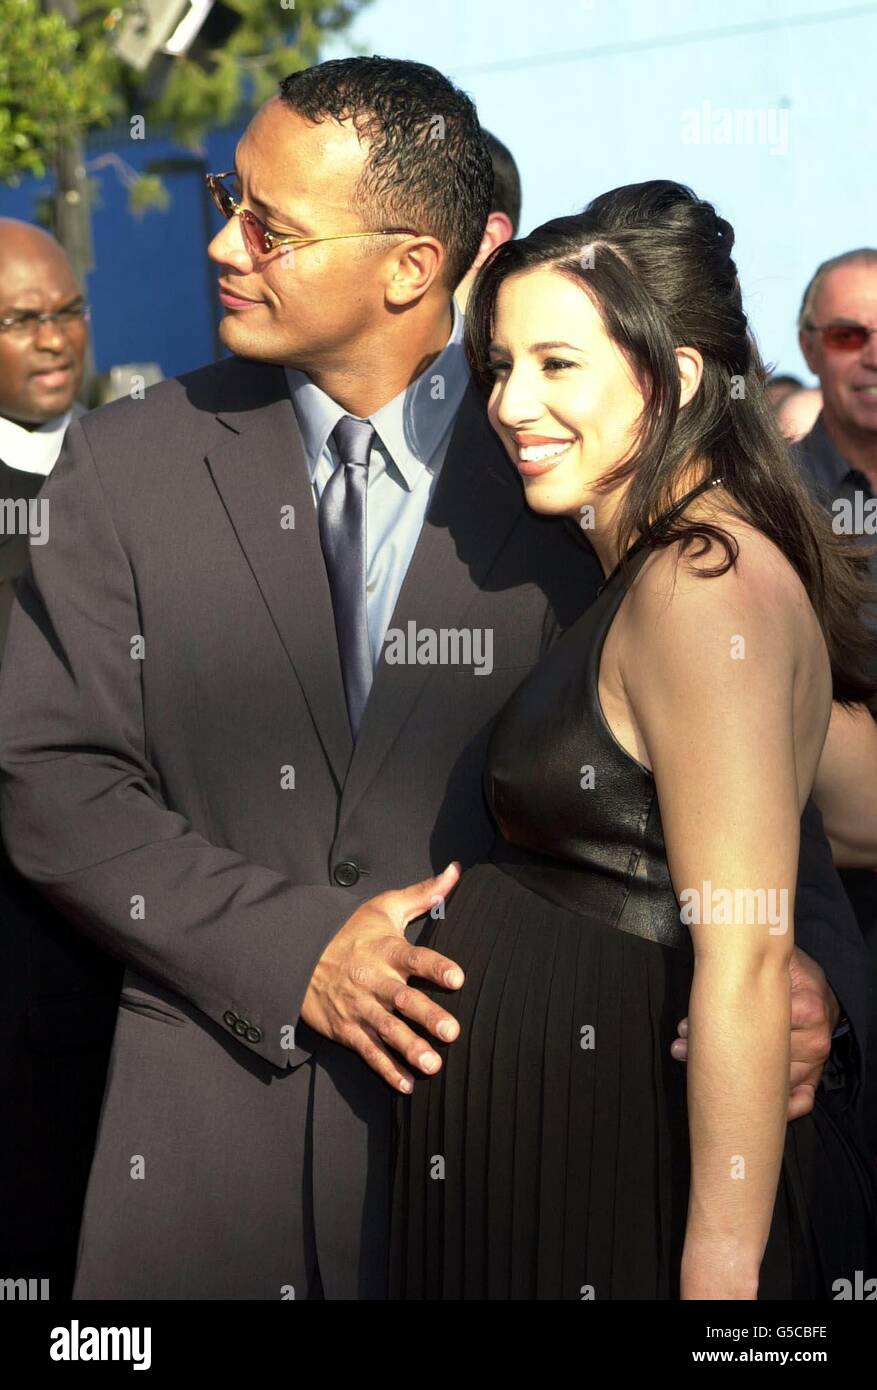 Actor and former wrestler Dwayne Johnson aka The Rock with his wife Dani arrive for the World Premiere of his latest film The Mummy Returns at the Universal Amphitheatre, Universal Studios, Los Angeles. Stock Photo